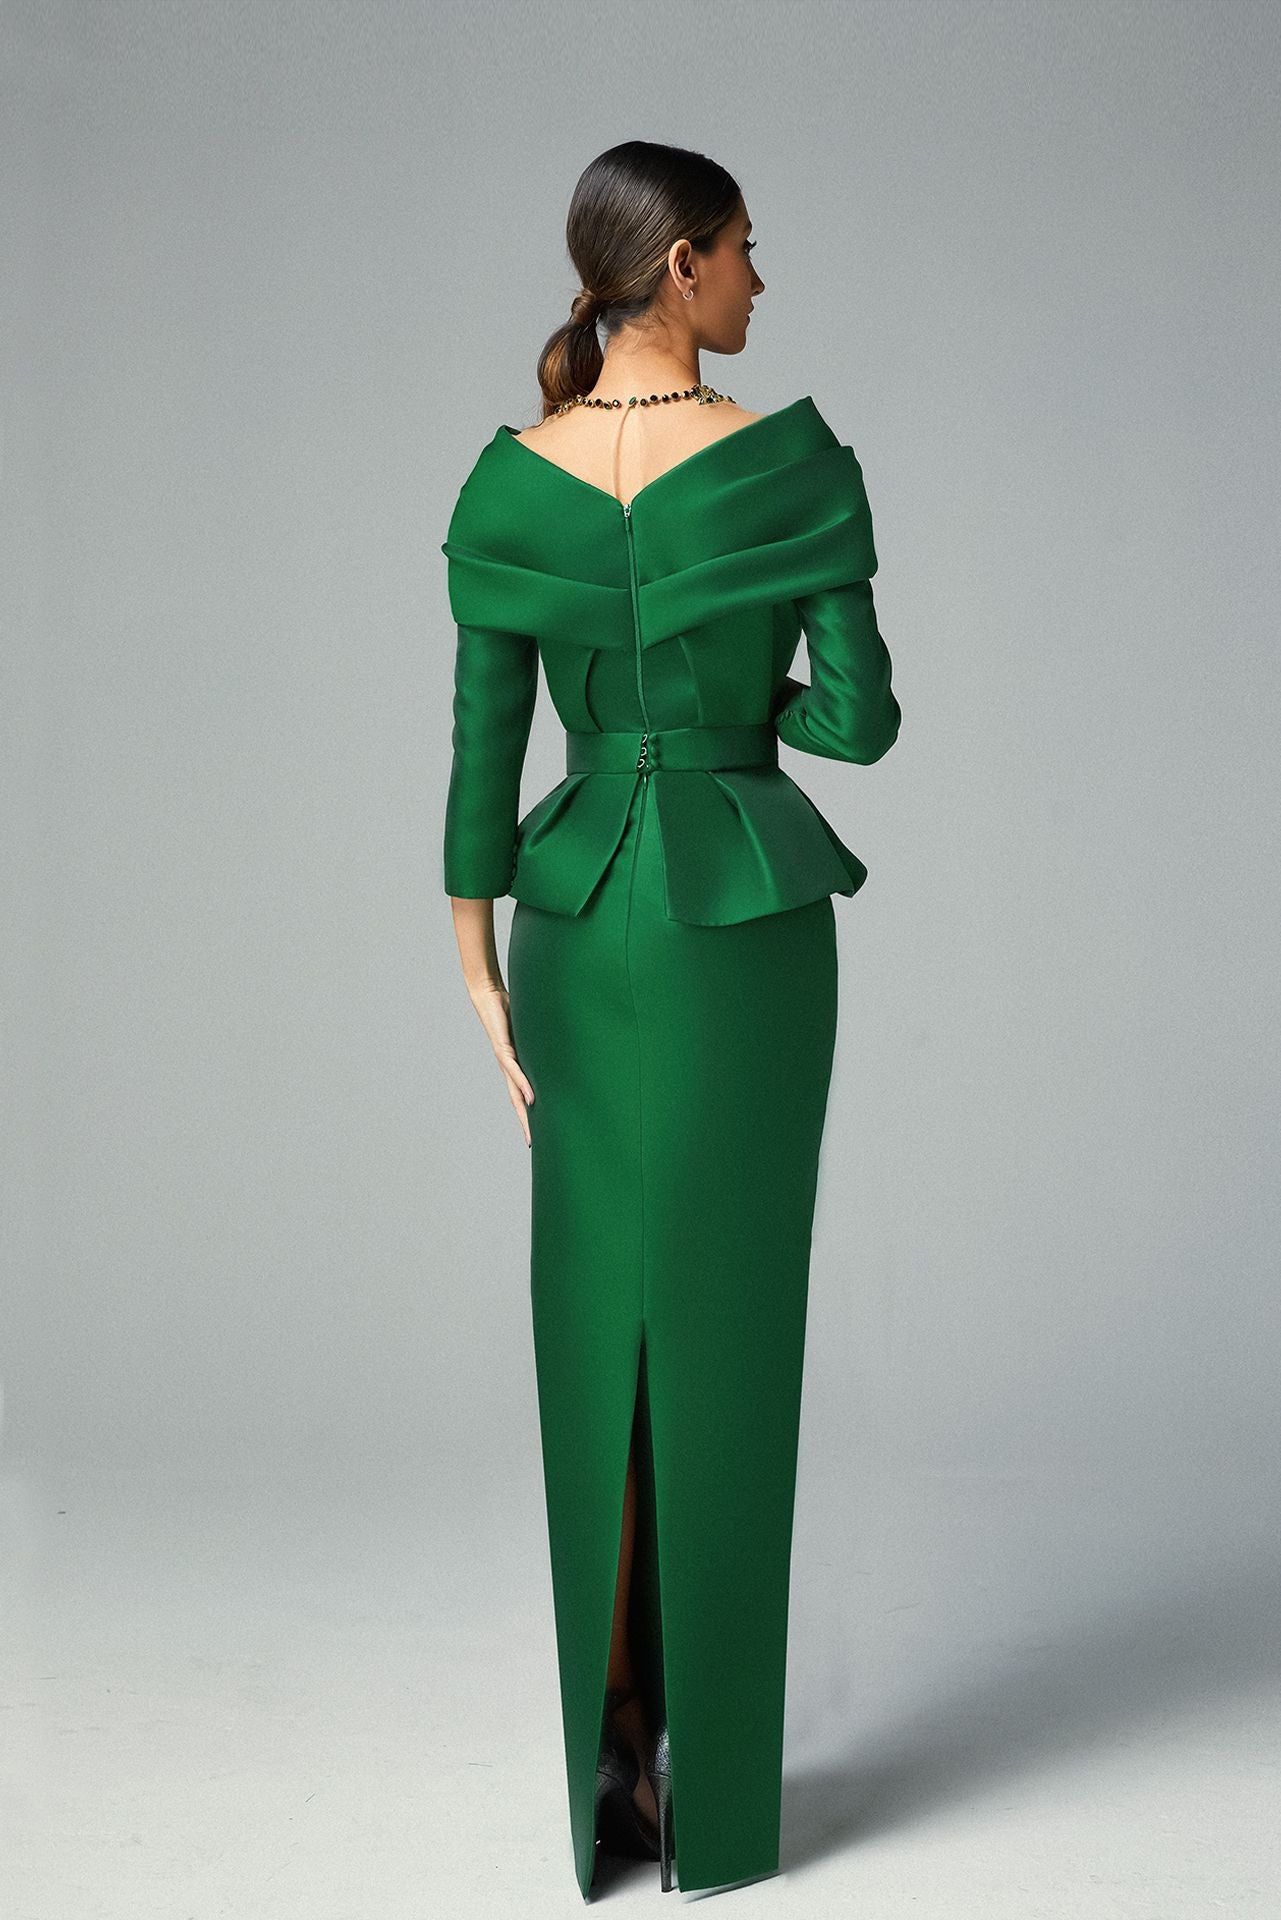 Load image into Gallery viewer, Off-shoulder Bow Tie Peplum Cady Emeralds Top with Column Long Skirt
